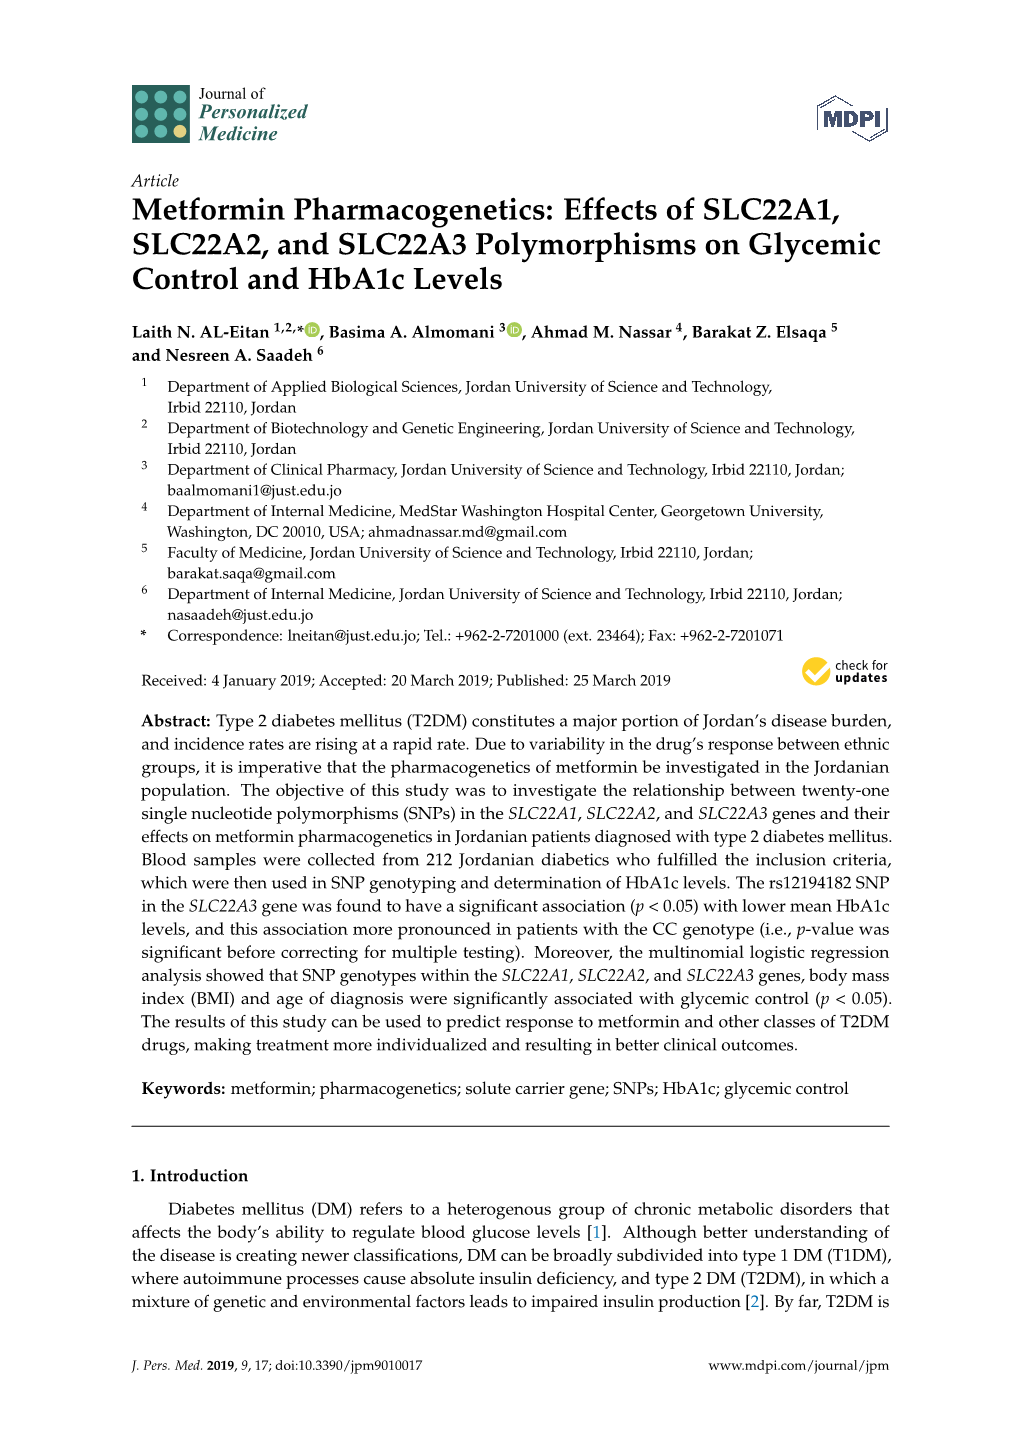 Metformin Pharmacogenetics: Effects of SLC22A1, SLC22A2, and SLC22A3 Polymorphisms on Glycemic Control and Hba1c Levels